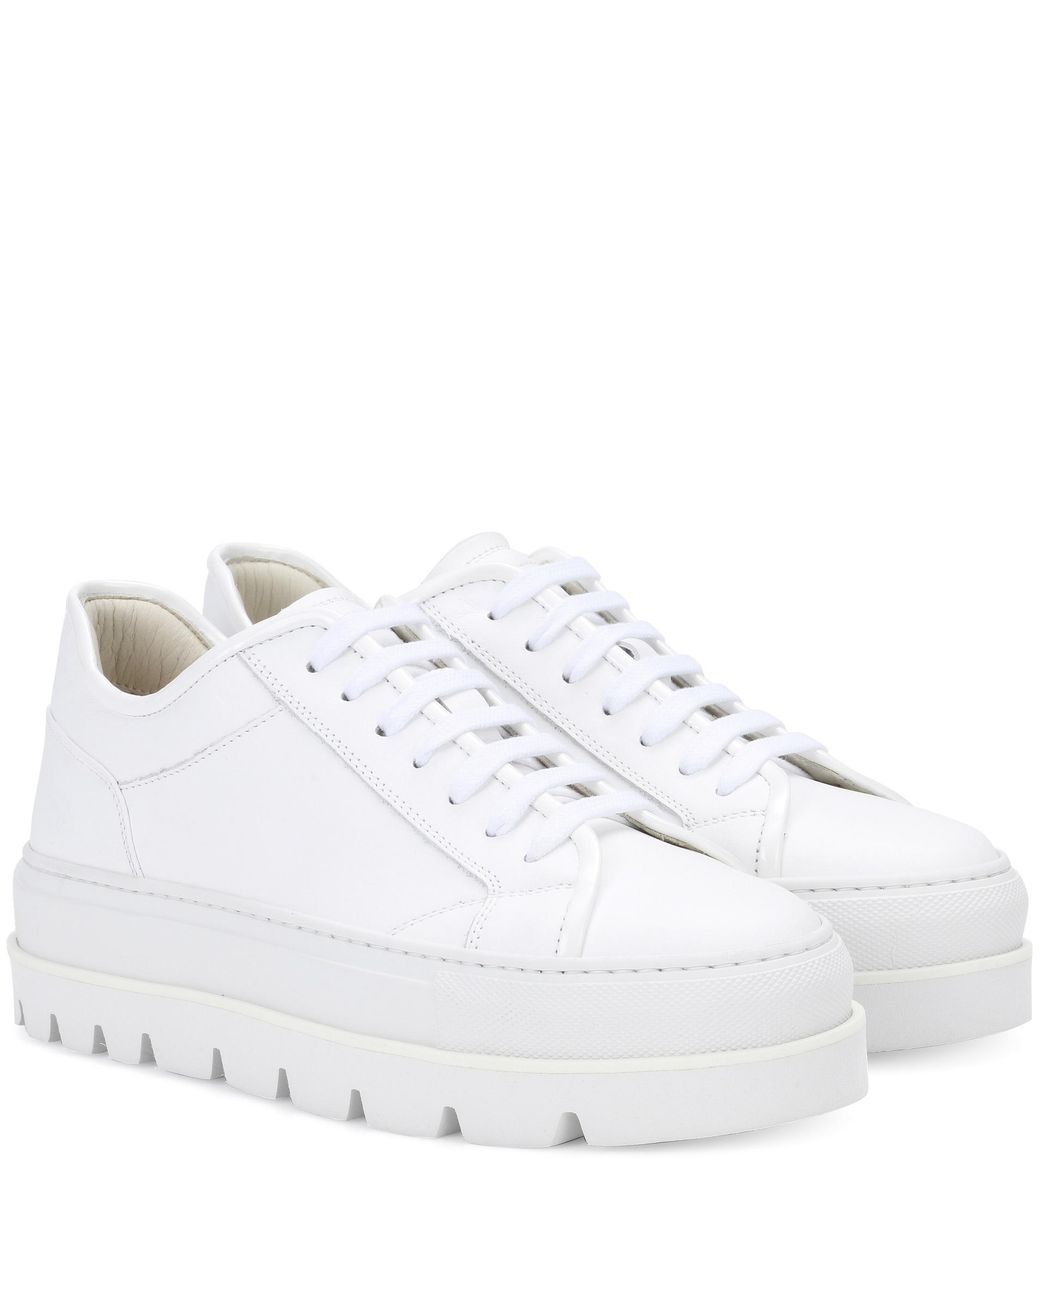 MM6 by Maison Martin Margiela Leather Platform Sneakers in White | Lyst